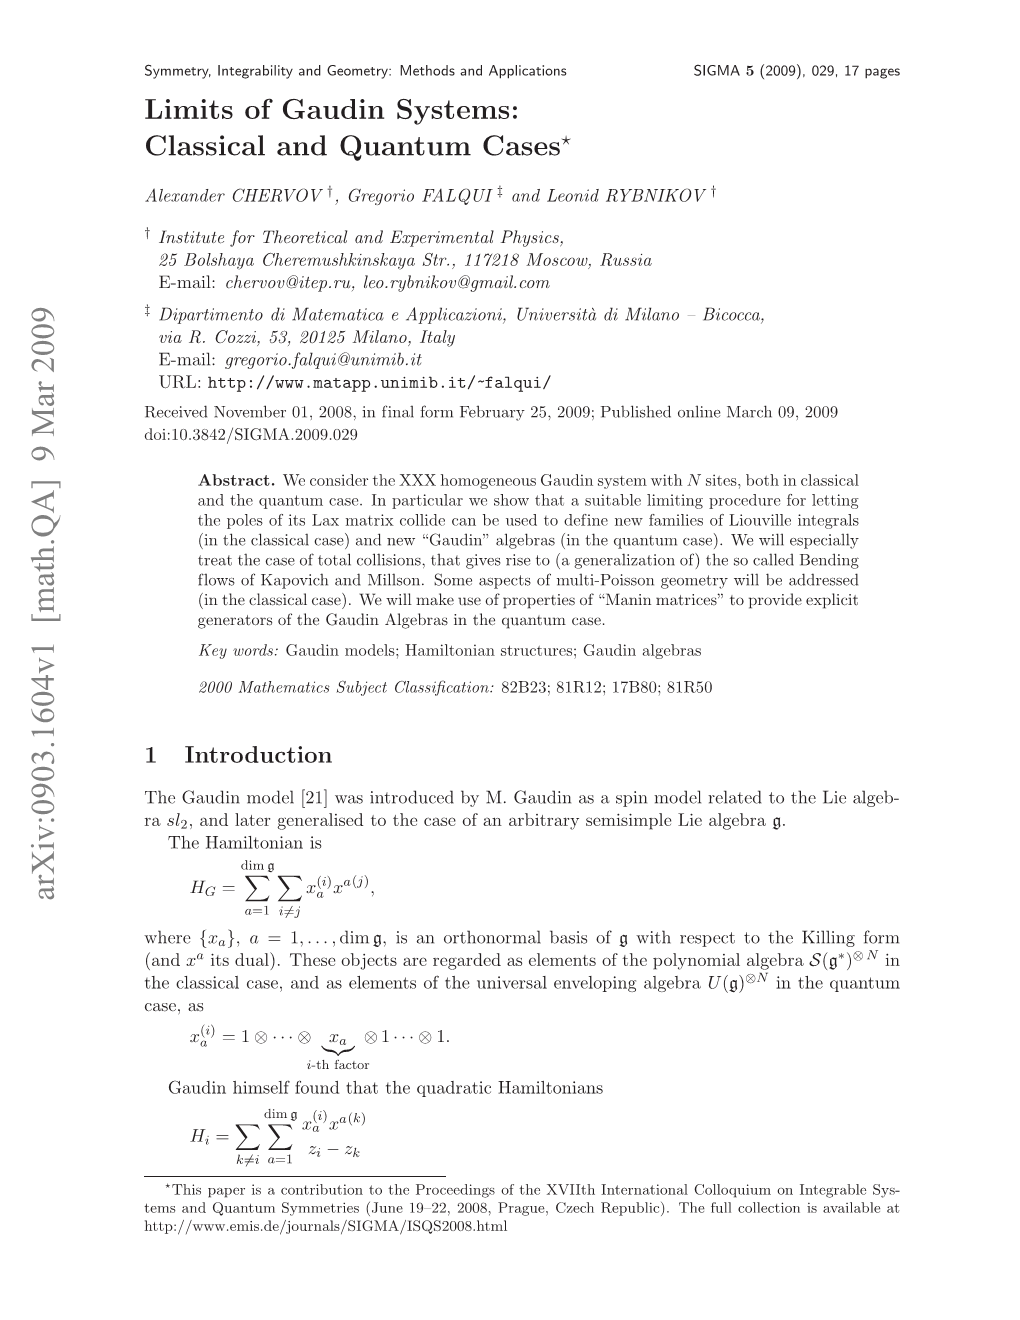 Limits of Gaudin Systems: Classical and Quantum Cases 3